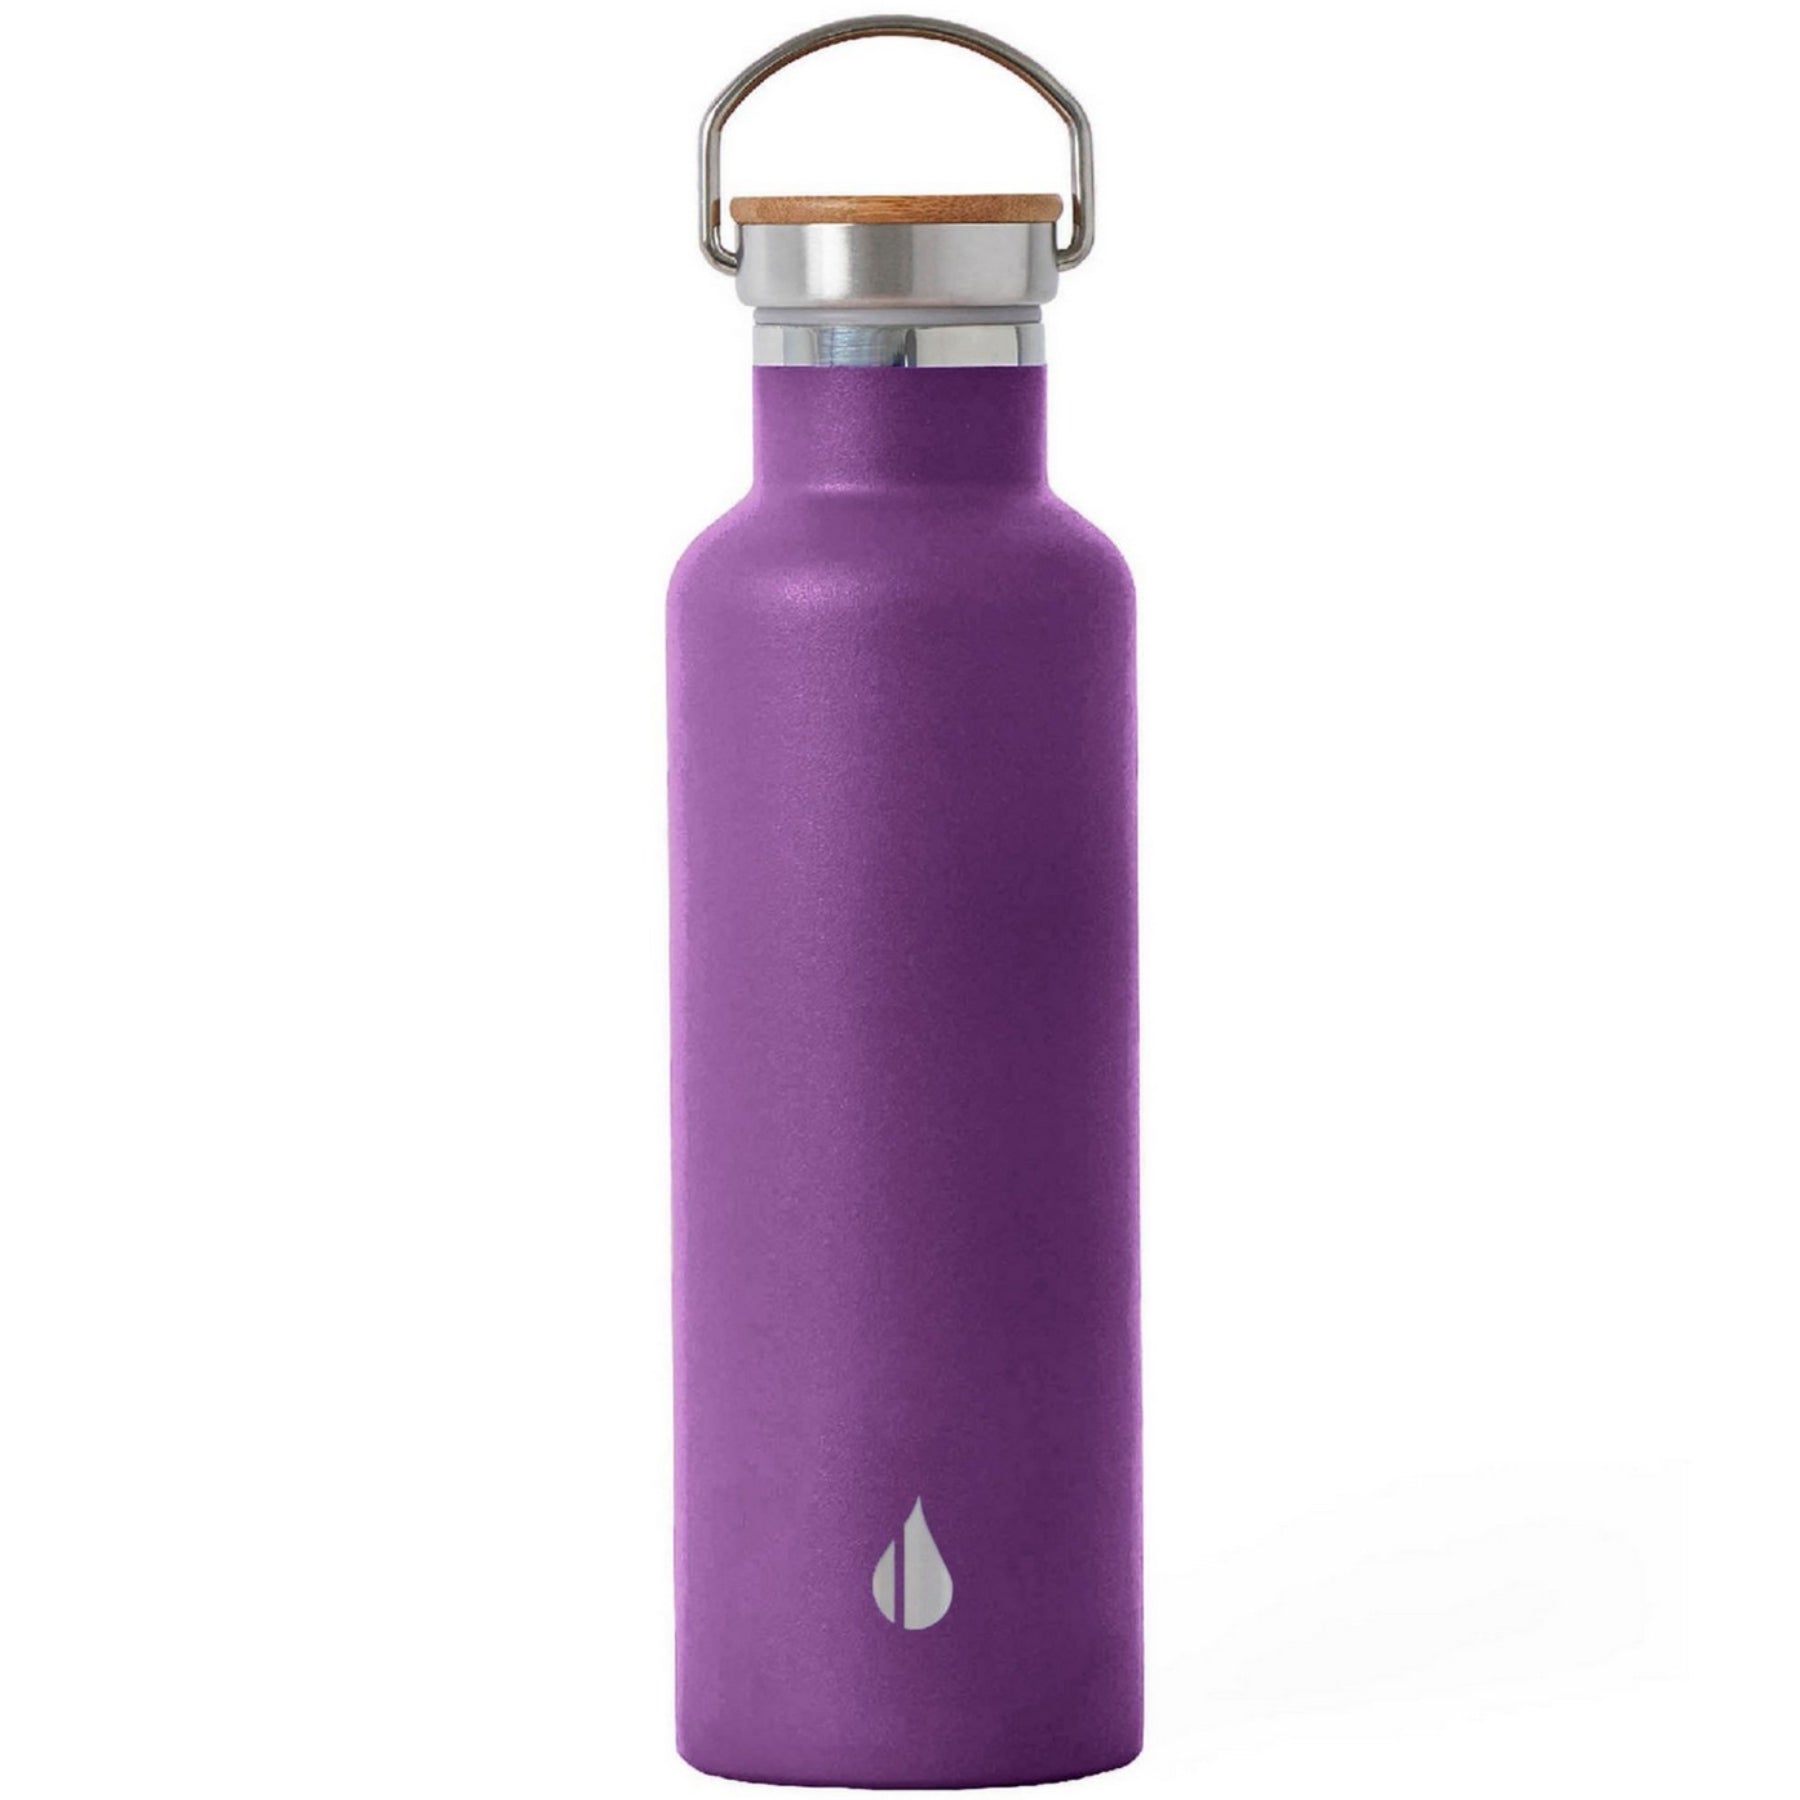 Customizable Elemental® 25 oz Stainless Steel Insulated Bottle in plum